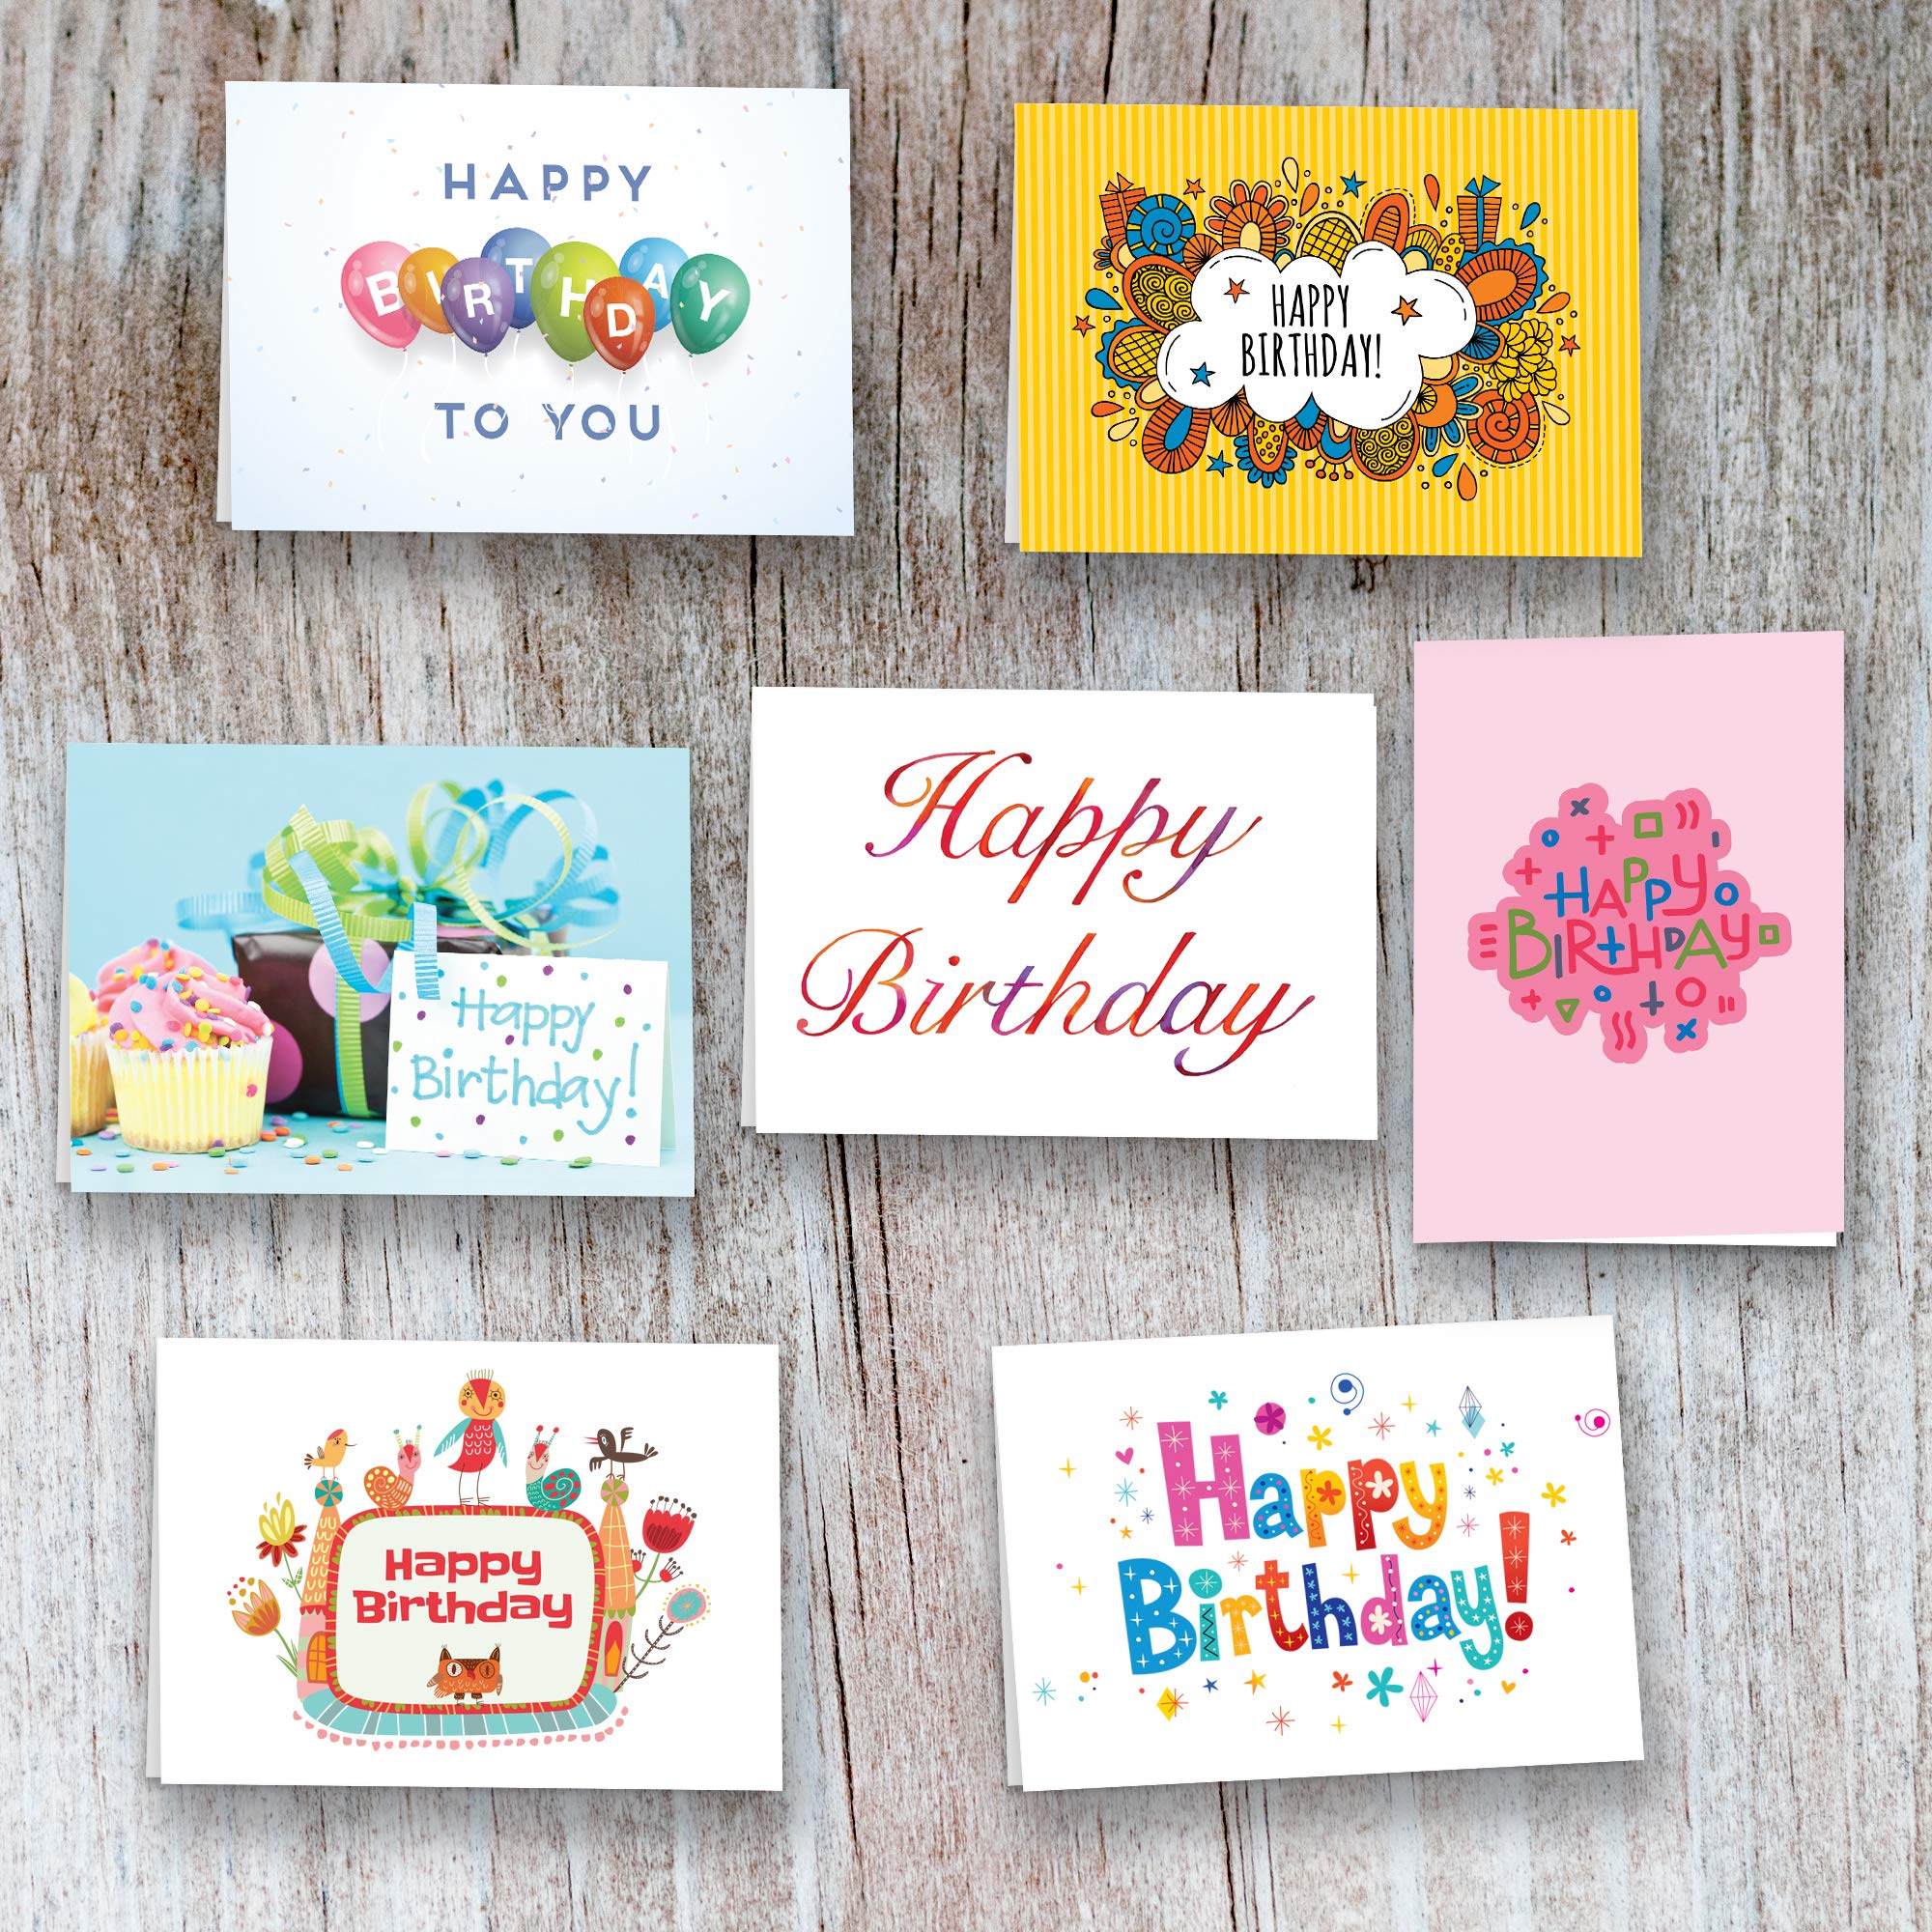 40 Happy Birthday Cards Assortment with Envelopes - Perfect Assorted Birthday Party Greetings Card for Men Women Kids Parent and Employees - Blank Inside With Original Humoristic Colorful Art Designs Outside - Quality Thick Cards